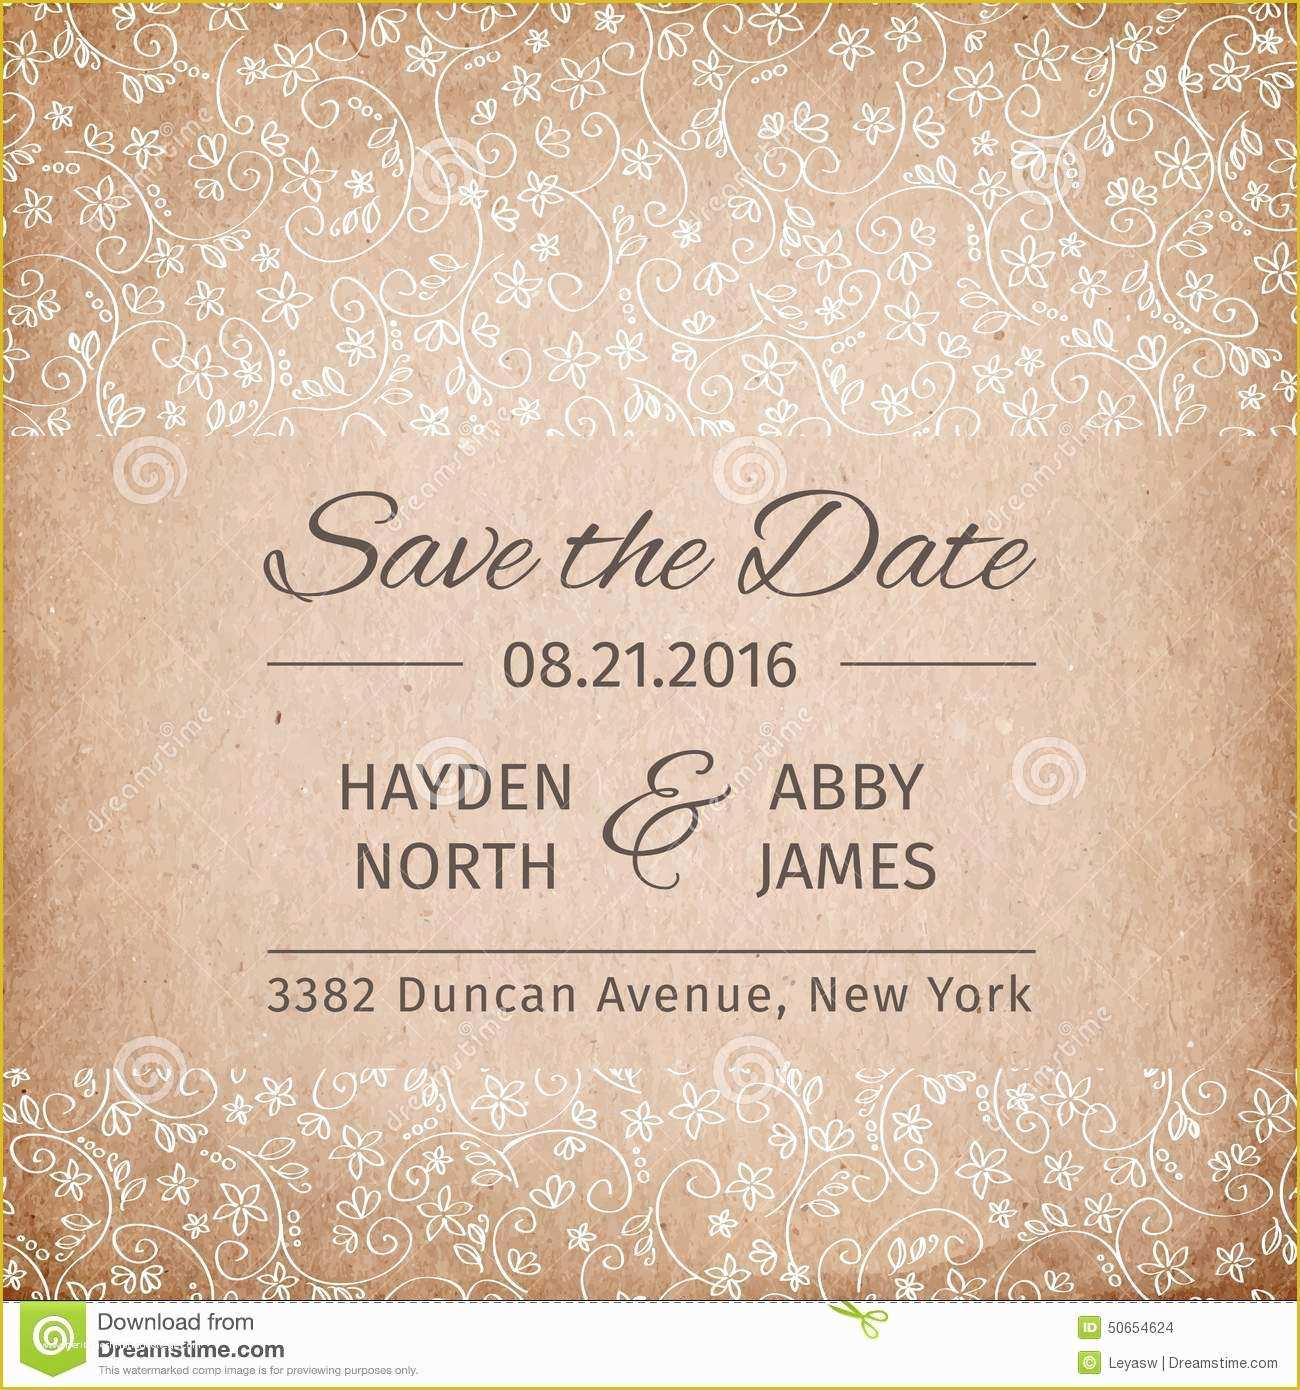 Save the Date Invitation Templates Free Of Save the Date Invitations